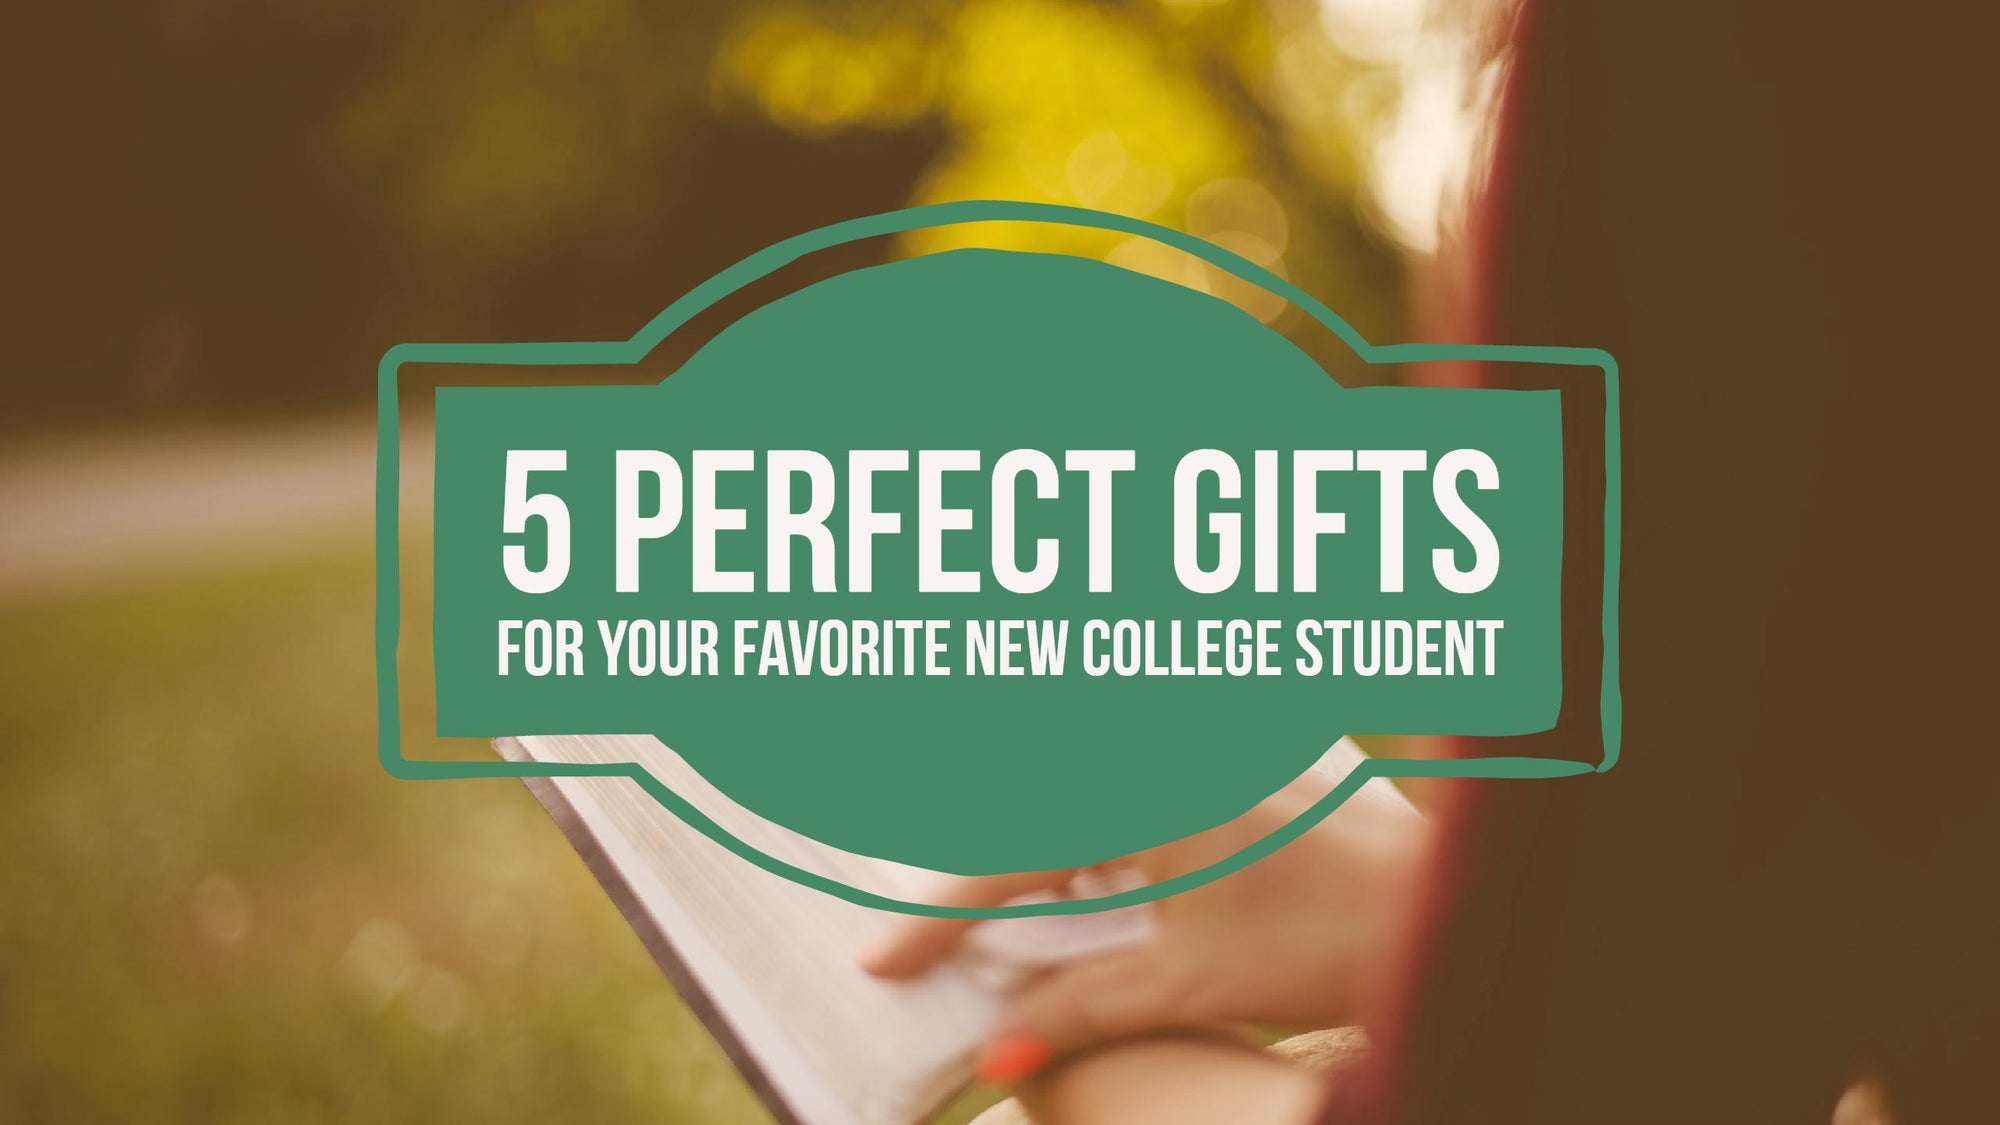 5 Perfect Gifts for the New College Student